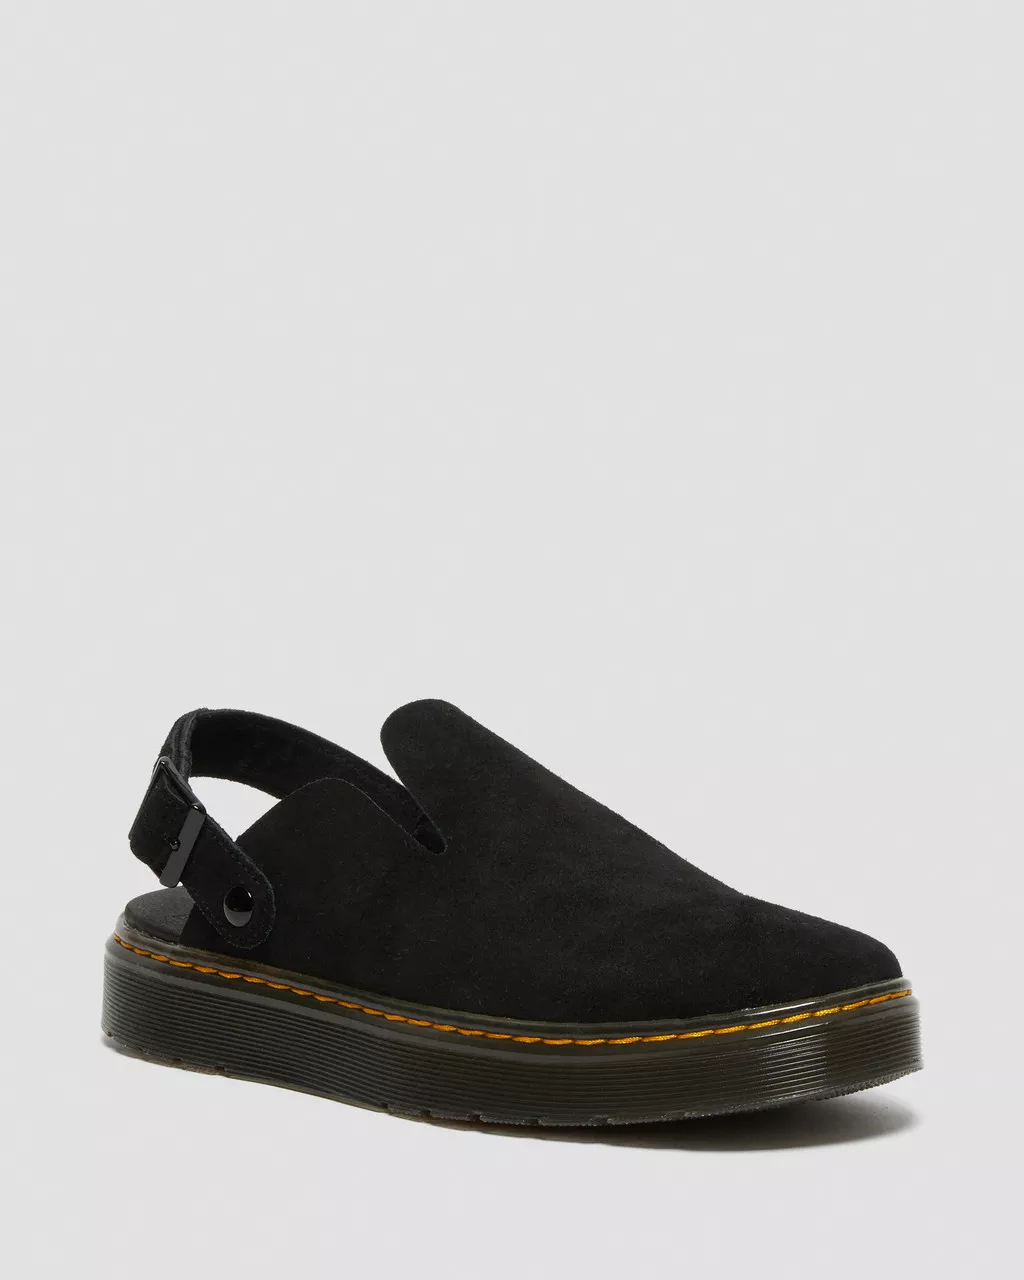 DR MARTENS FEMME CARLSON SUEDE CASUAL SLINGBACK MULES BLACK